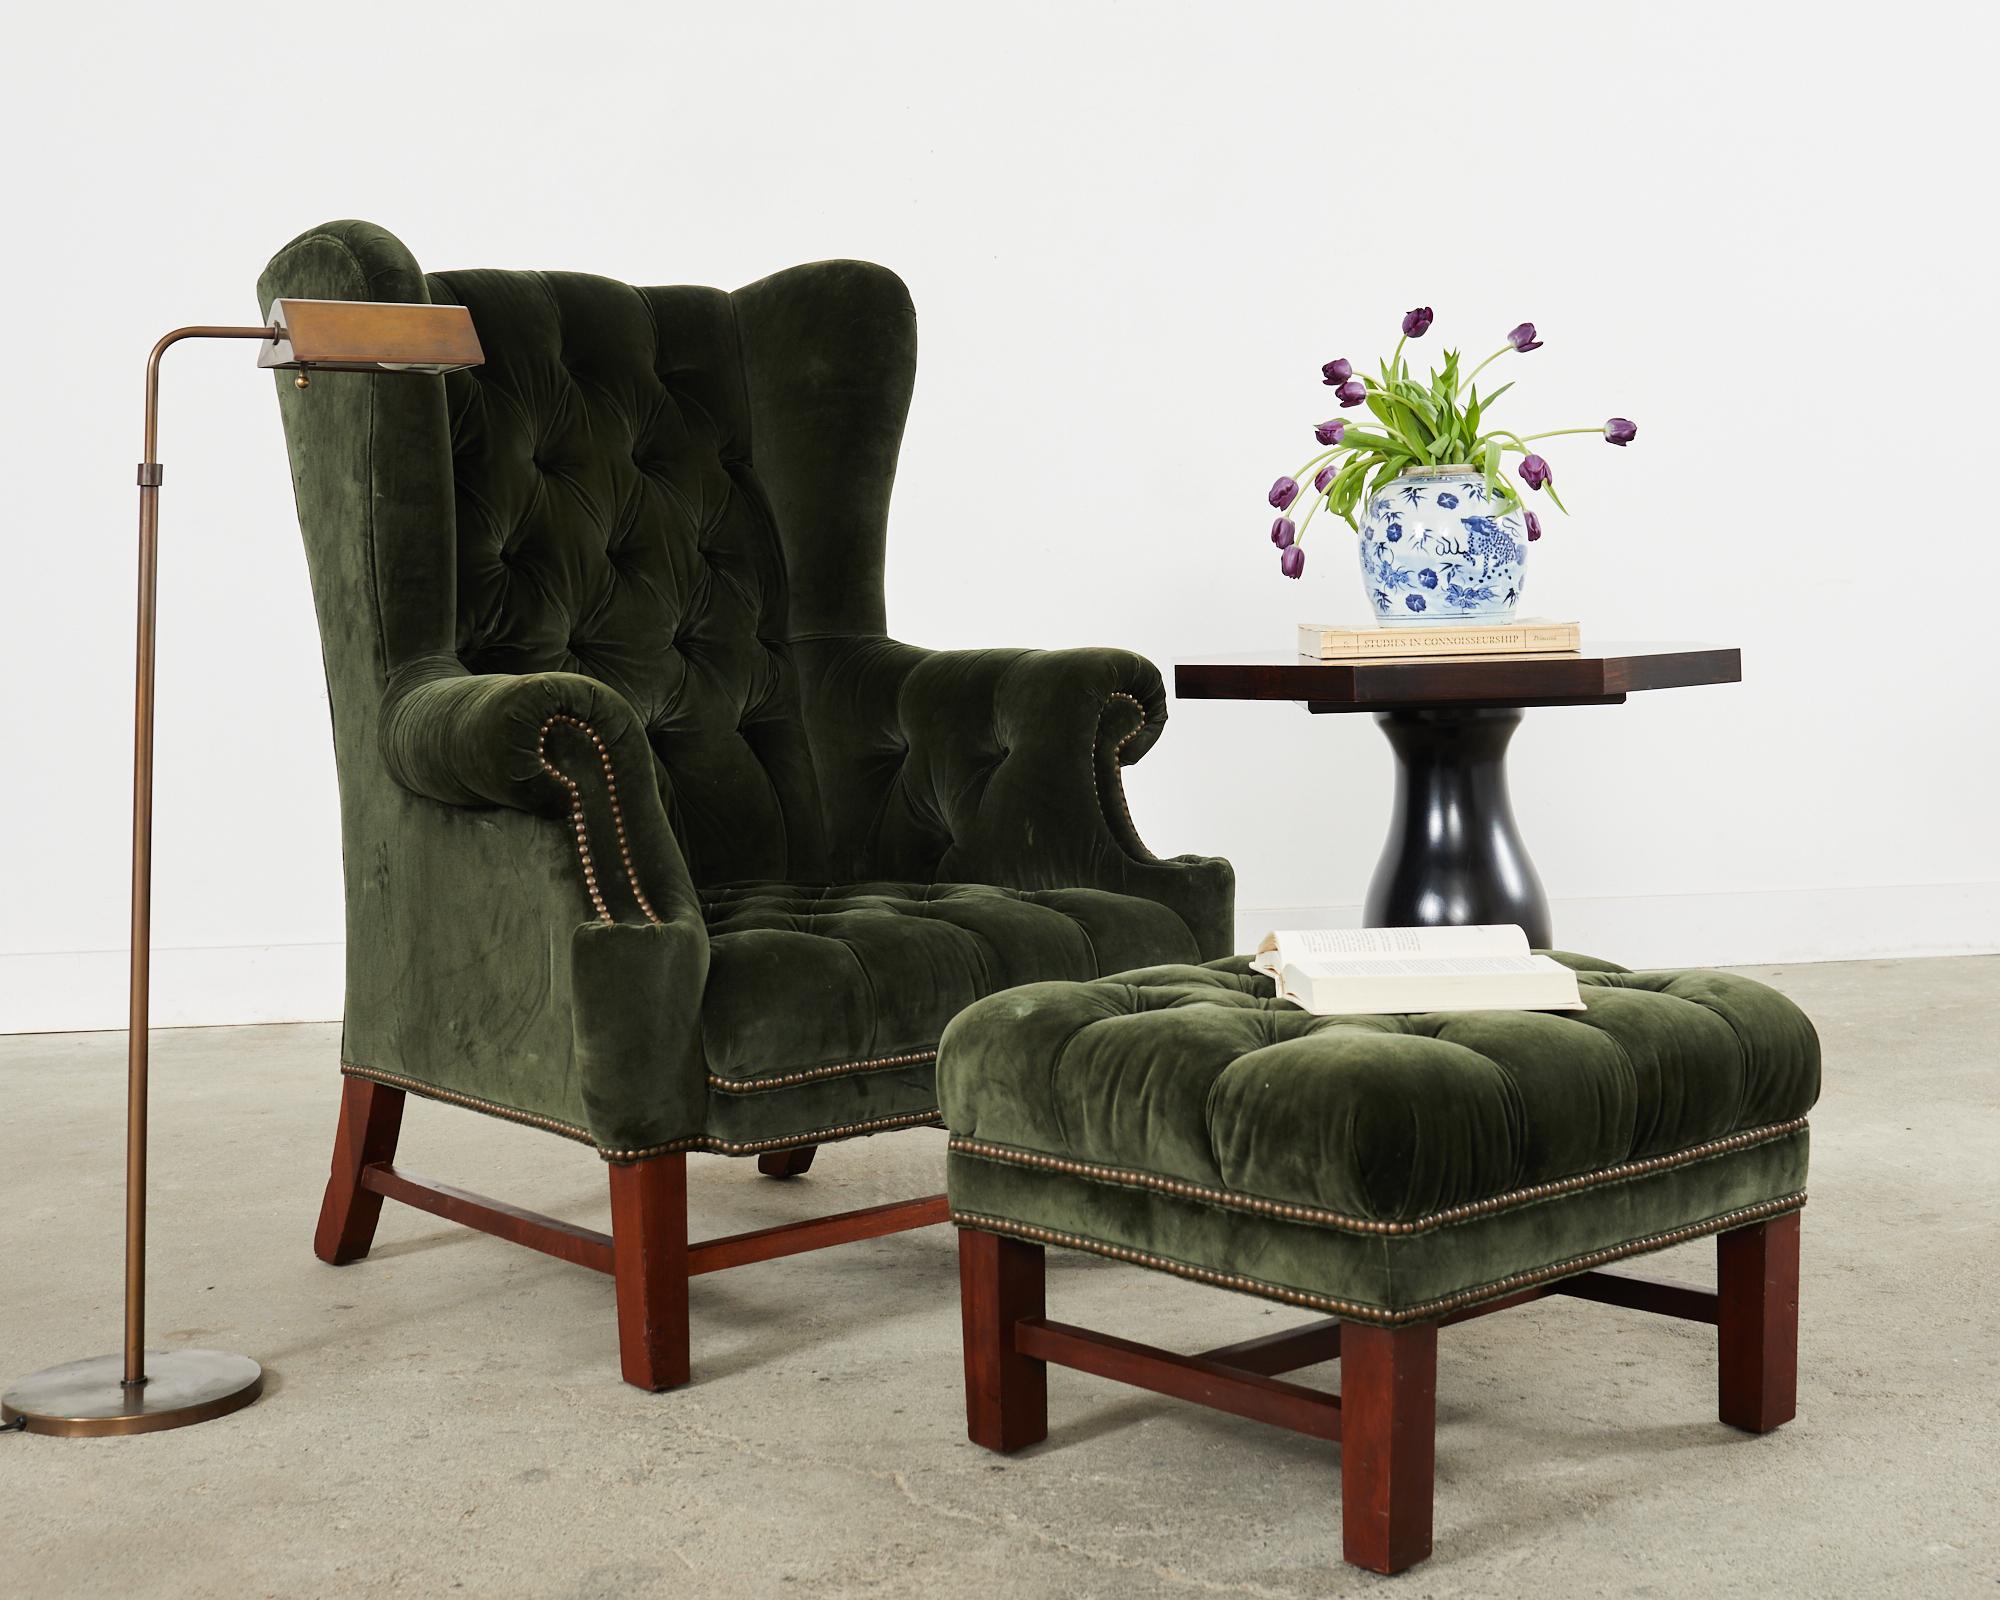 Stately English Georgian style Devonshire wingback armchair designed by Ralph Lauren for Henredon. The grand chair features a large beechwood frame with fully developed wings and a matching ottoman. The frame is upholstered with an Italian velvet